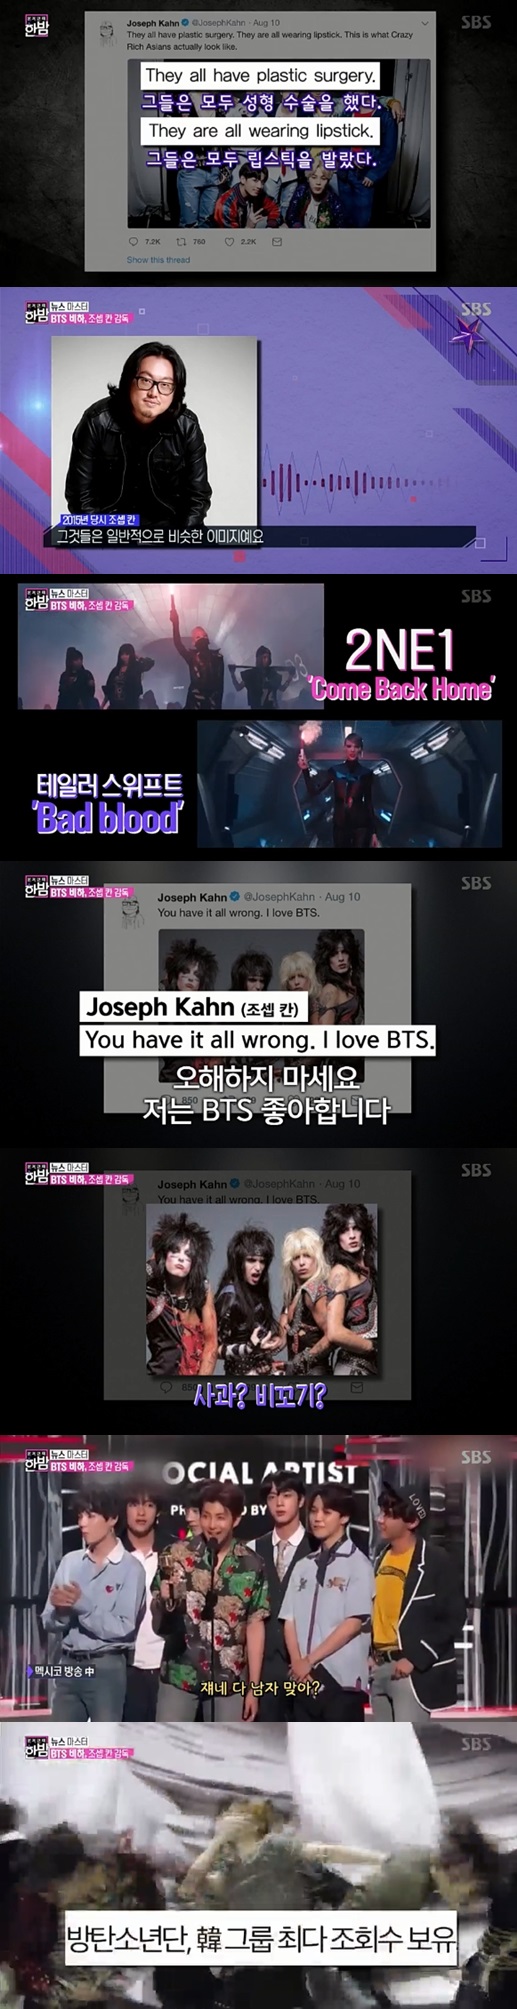 Korean American Music Video director Joseph Khan has been in trouble for disparaging the domestic idol group BTS.On SBS s Full Entertainment Midnight broadcast on the 14th night, we discussed the news related to director Joseph Khan, who demeaned the group BTS.Korean-American director Joseph Khan is a well-known director who has worked with Britney Spears, Mariah Carey, Beyonce and Taylor Swift.But he recently told his Twitter Inc., referring to BTS, They all had plastic surgery and applied mode lipstick.The real image of the crazy Wealthy Asians, he said, leaving a controversial figure.Angered BTS fans strongly criticized him to stop racist remarks, and Khan hastened to post an explanation saying, I like BTS (BTS), but the photos posted together were filled with the wrong people, raising suspicions that it was not sick.Meanwhile, Joseph Khan has denied himself in 2015 although there was suspicion that he plagiarized 2NE1s Comeback Home Music Video.